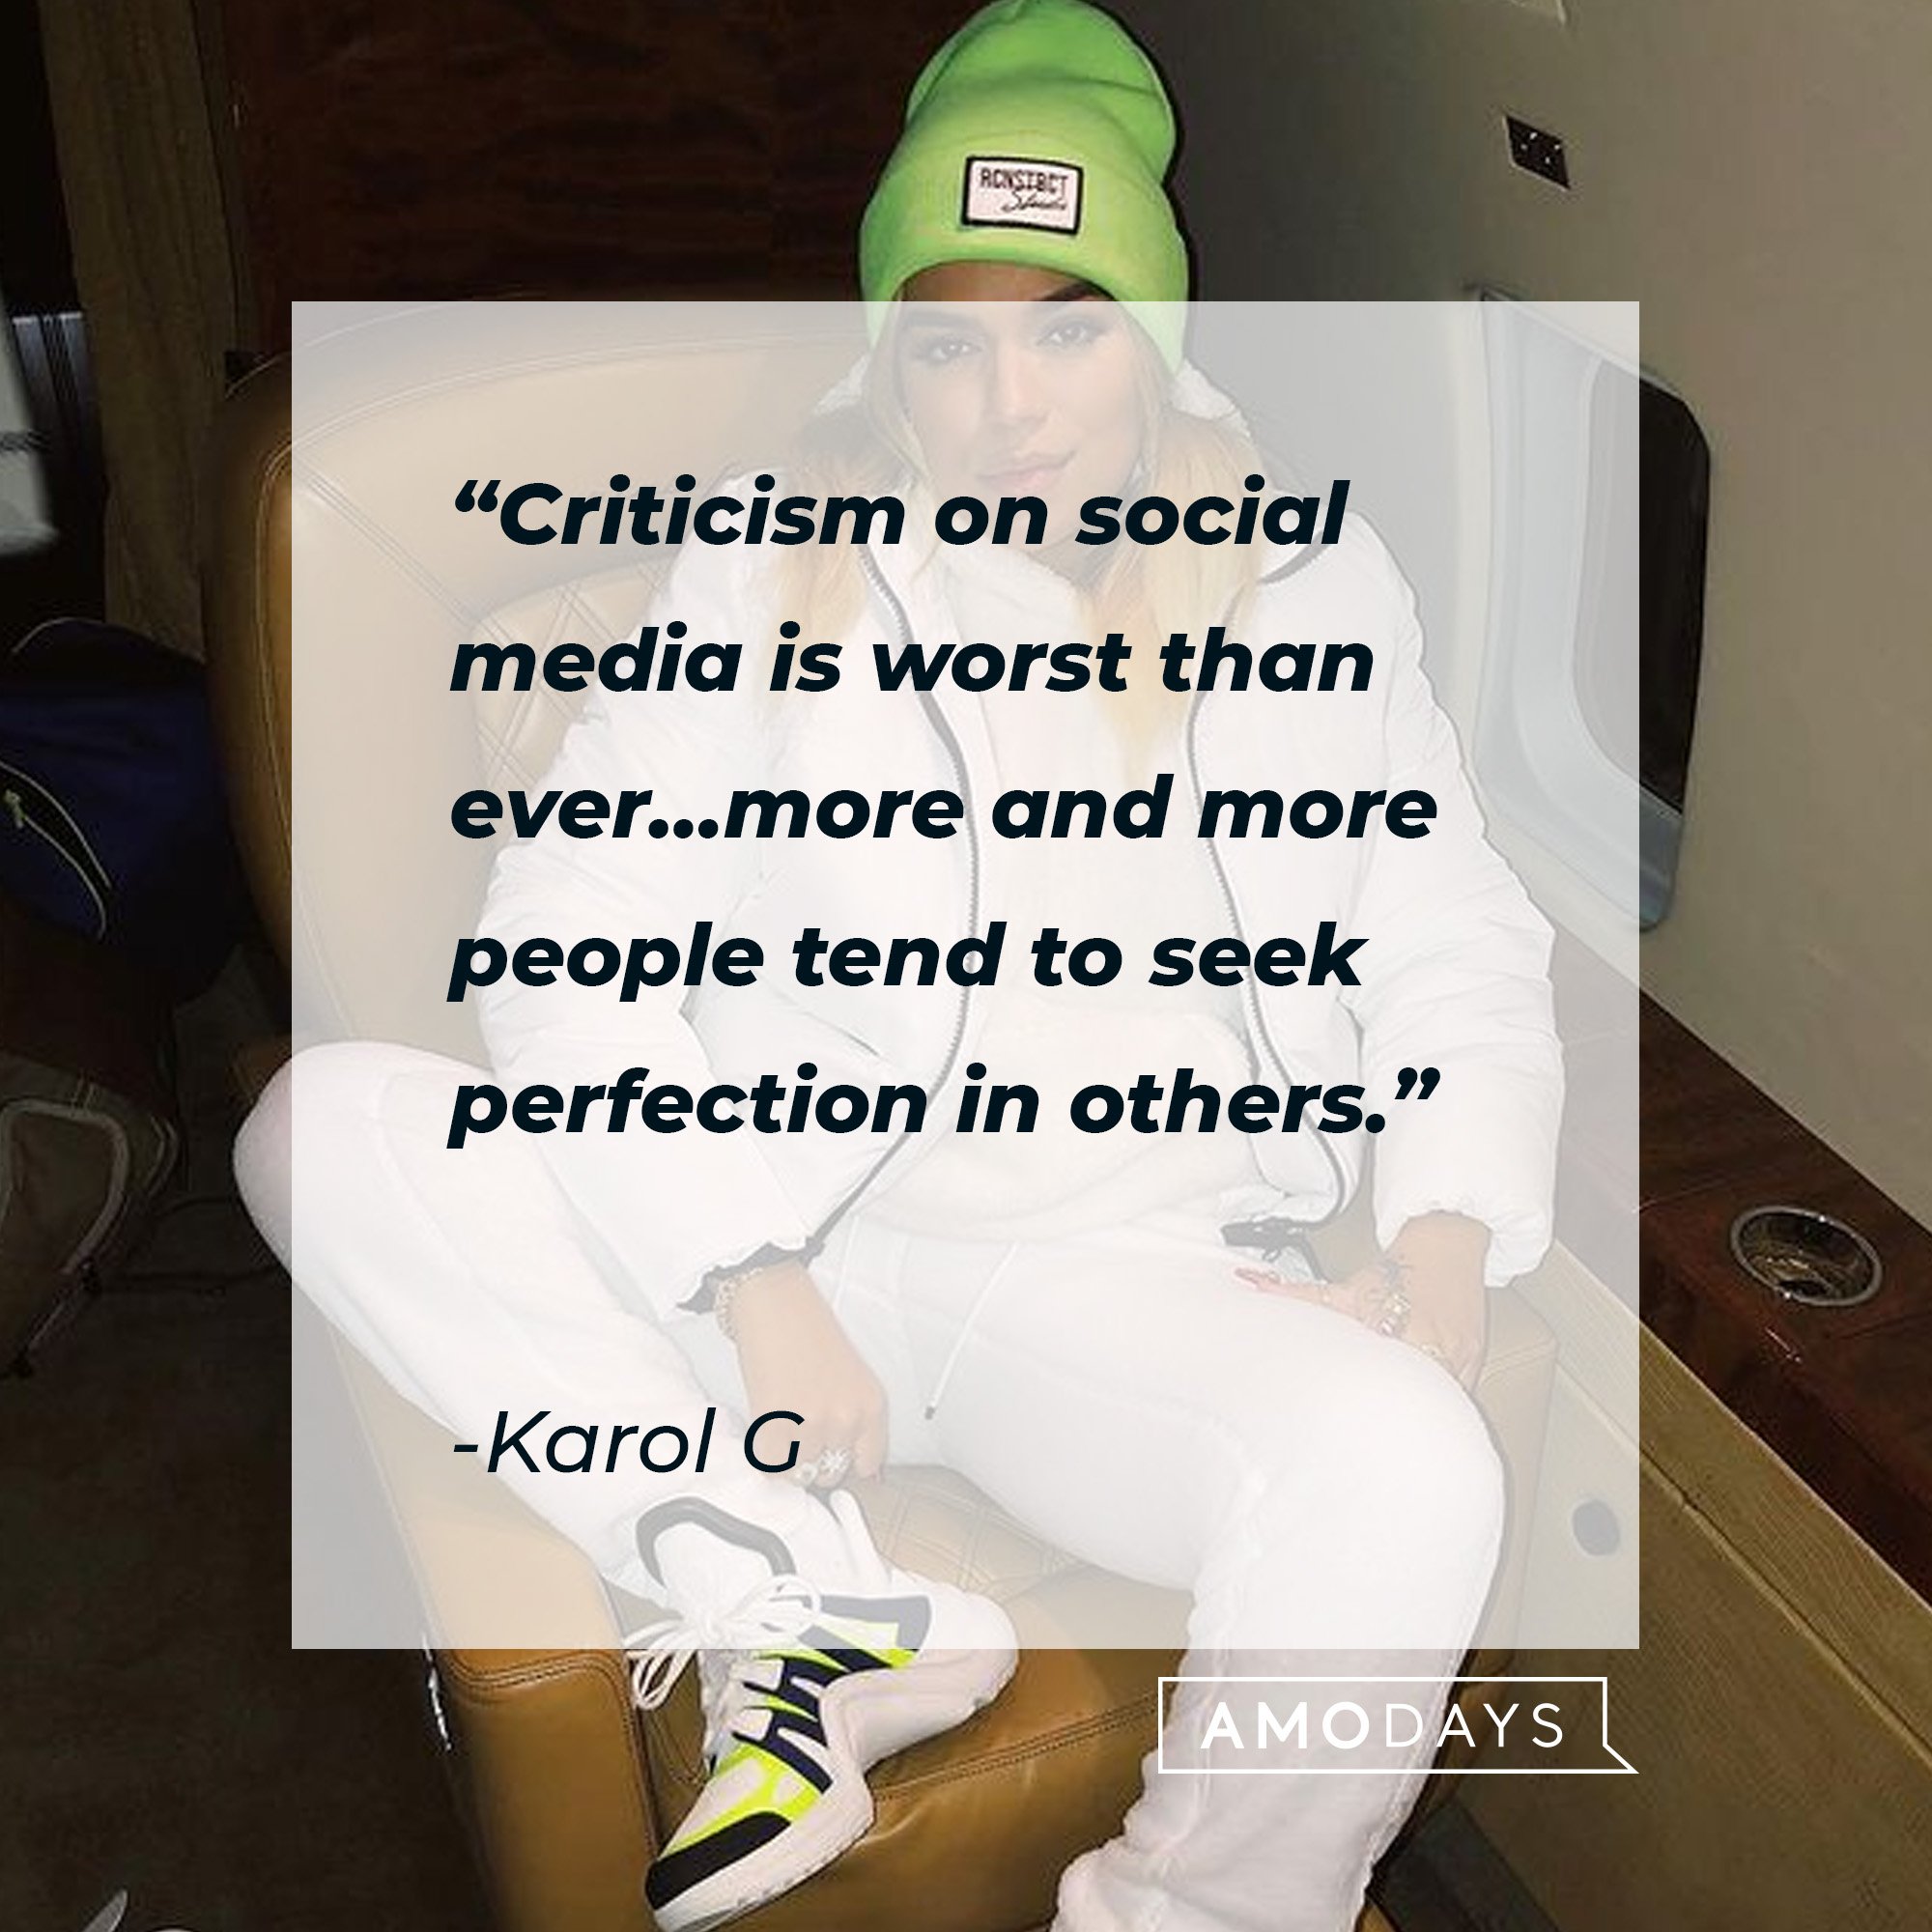  Karol G’s quote: "Criticism on social media is worst than ever… more and more people tend to seek perfection in others." | Image: AmoDays